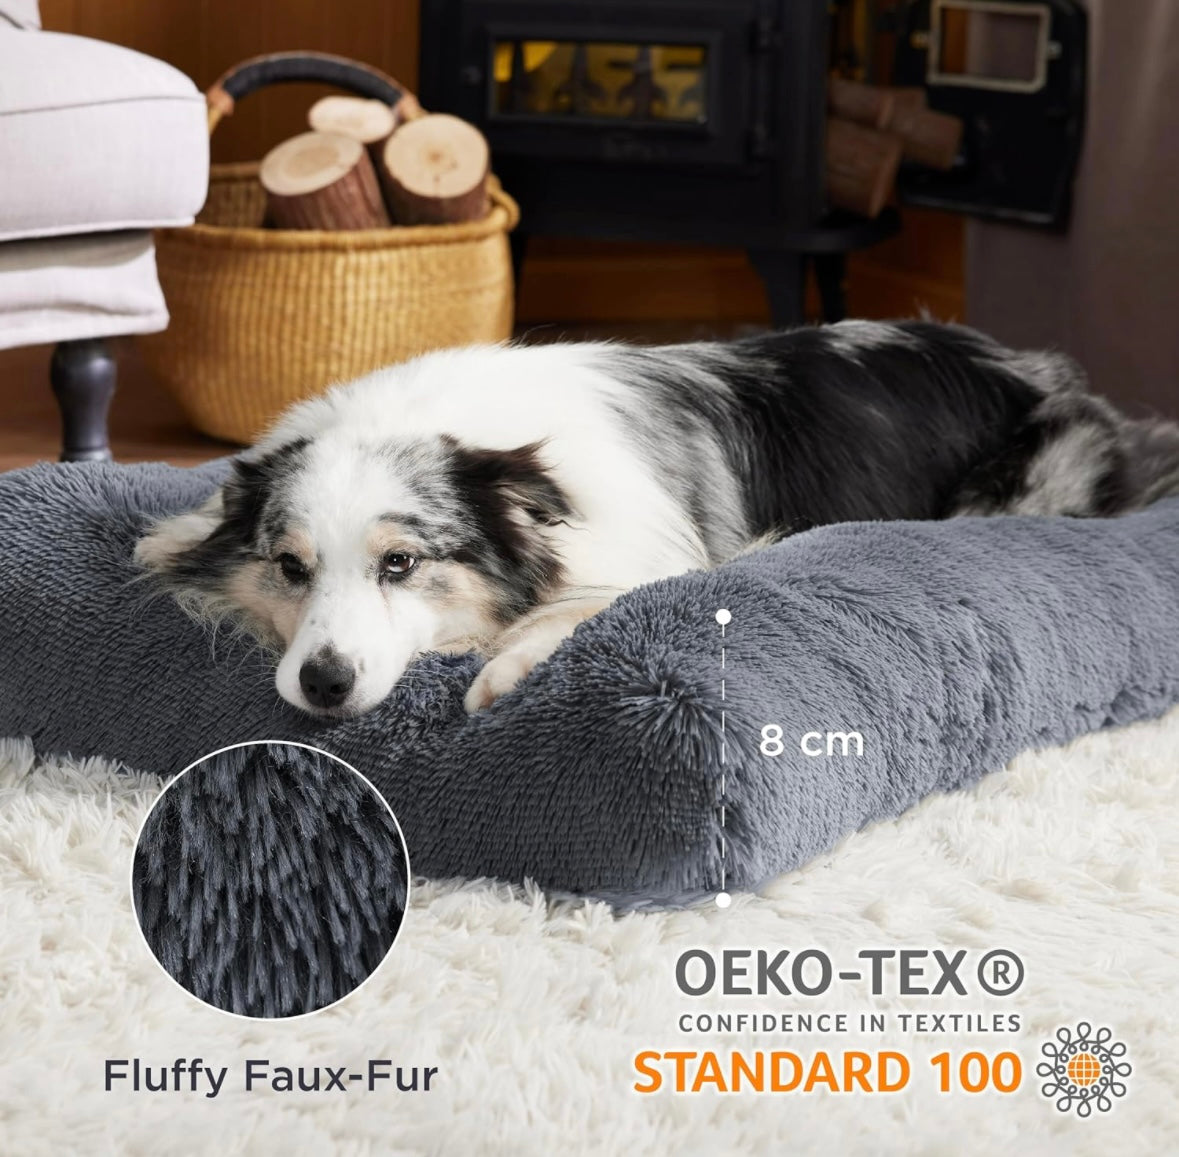 Super soft dog bed to aid anxiety